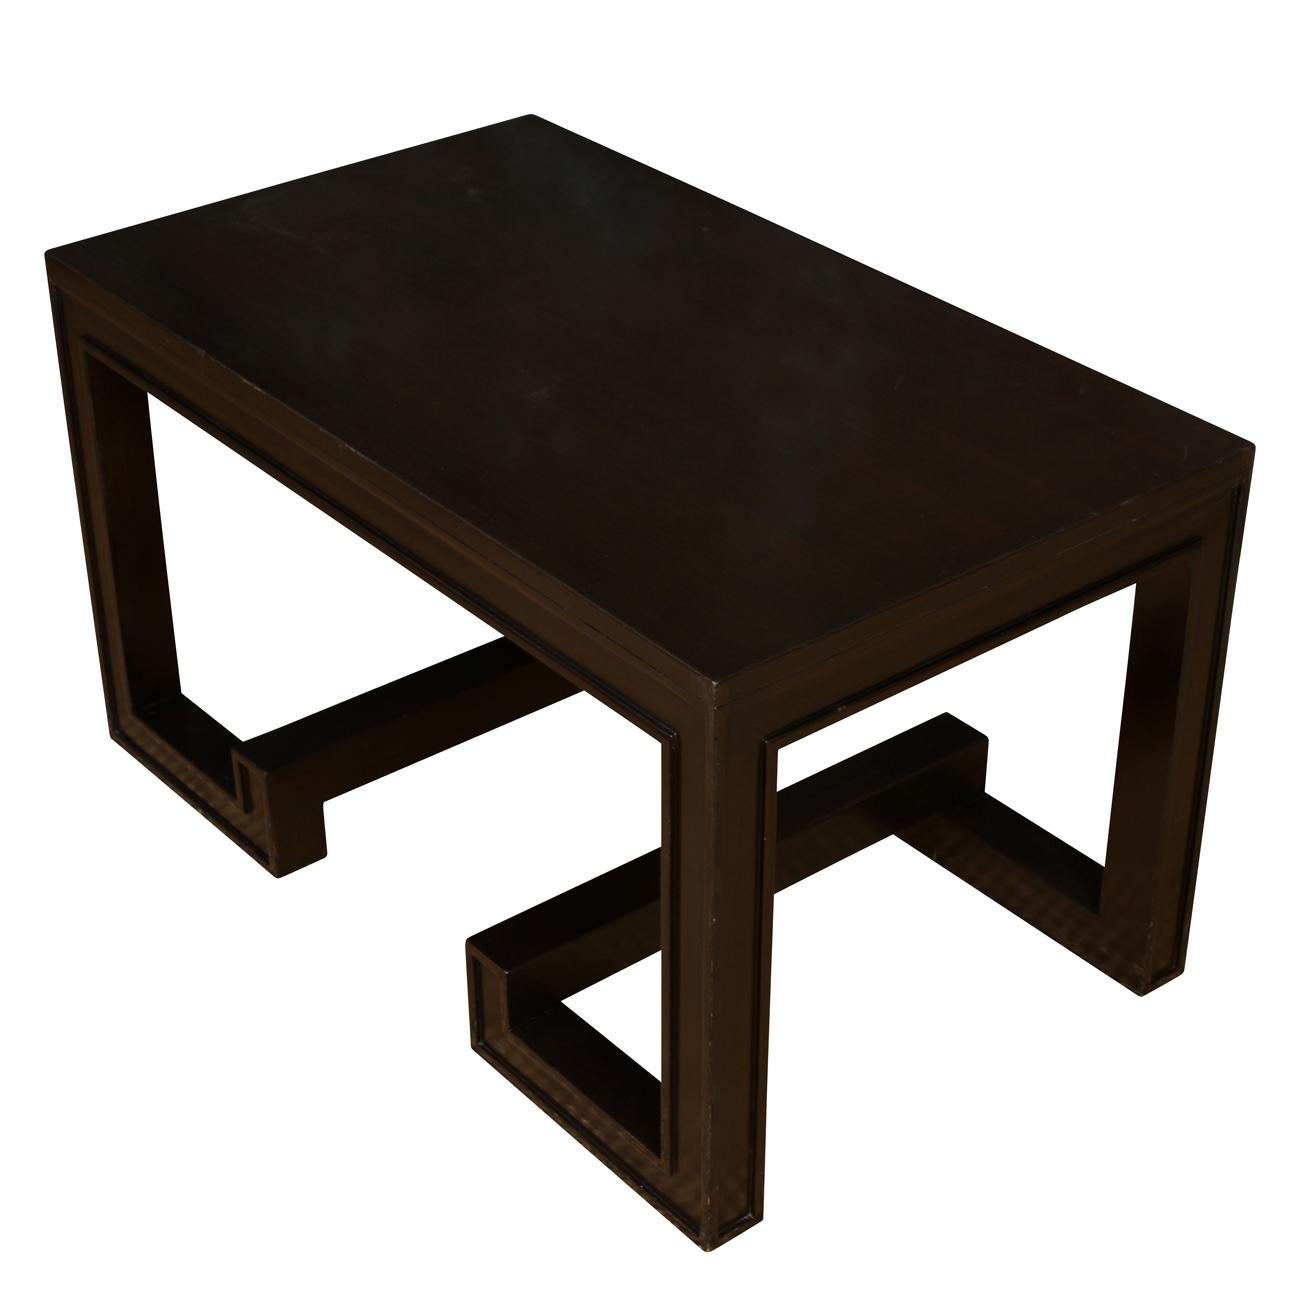 A deep chocolate brown painted modernist coffee table with an angular base.